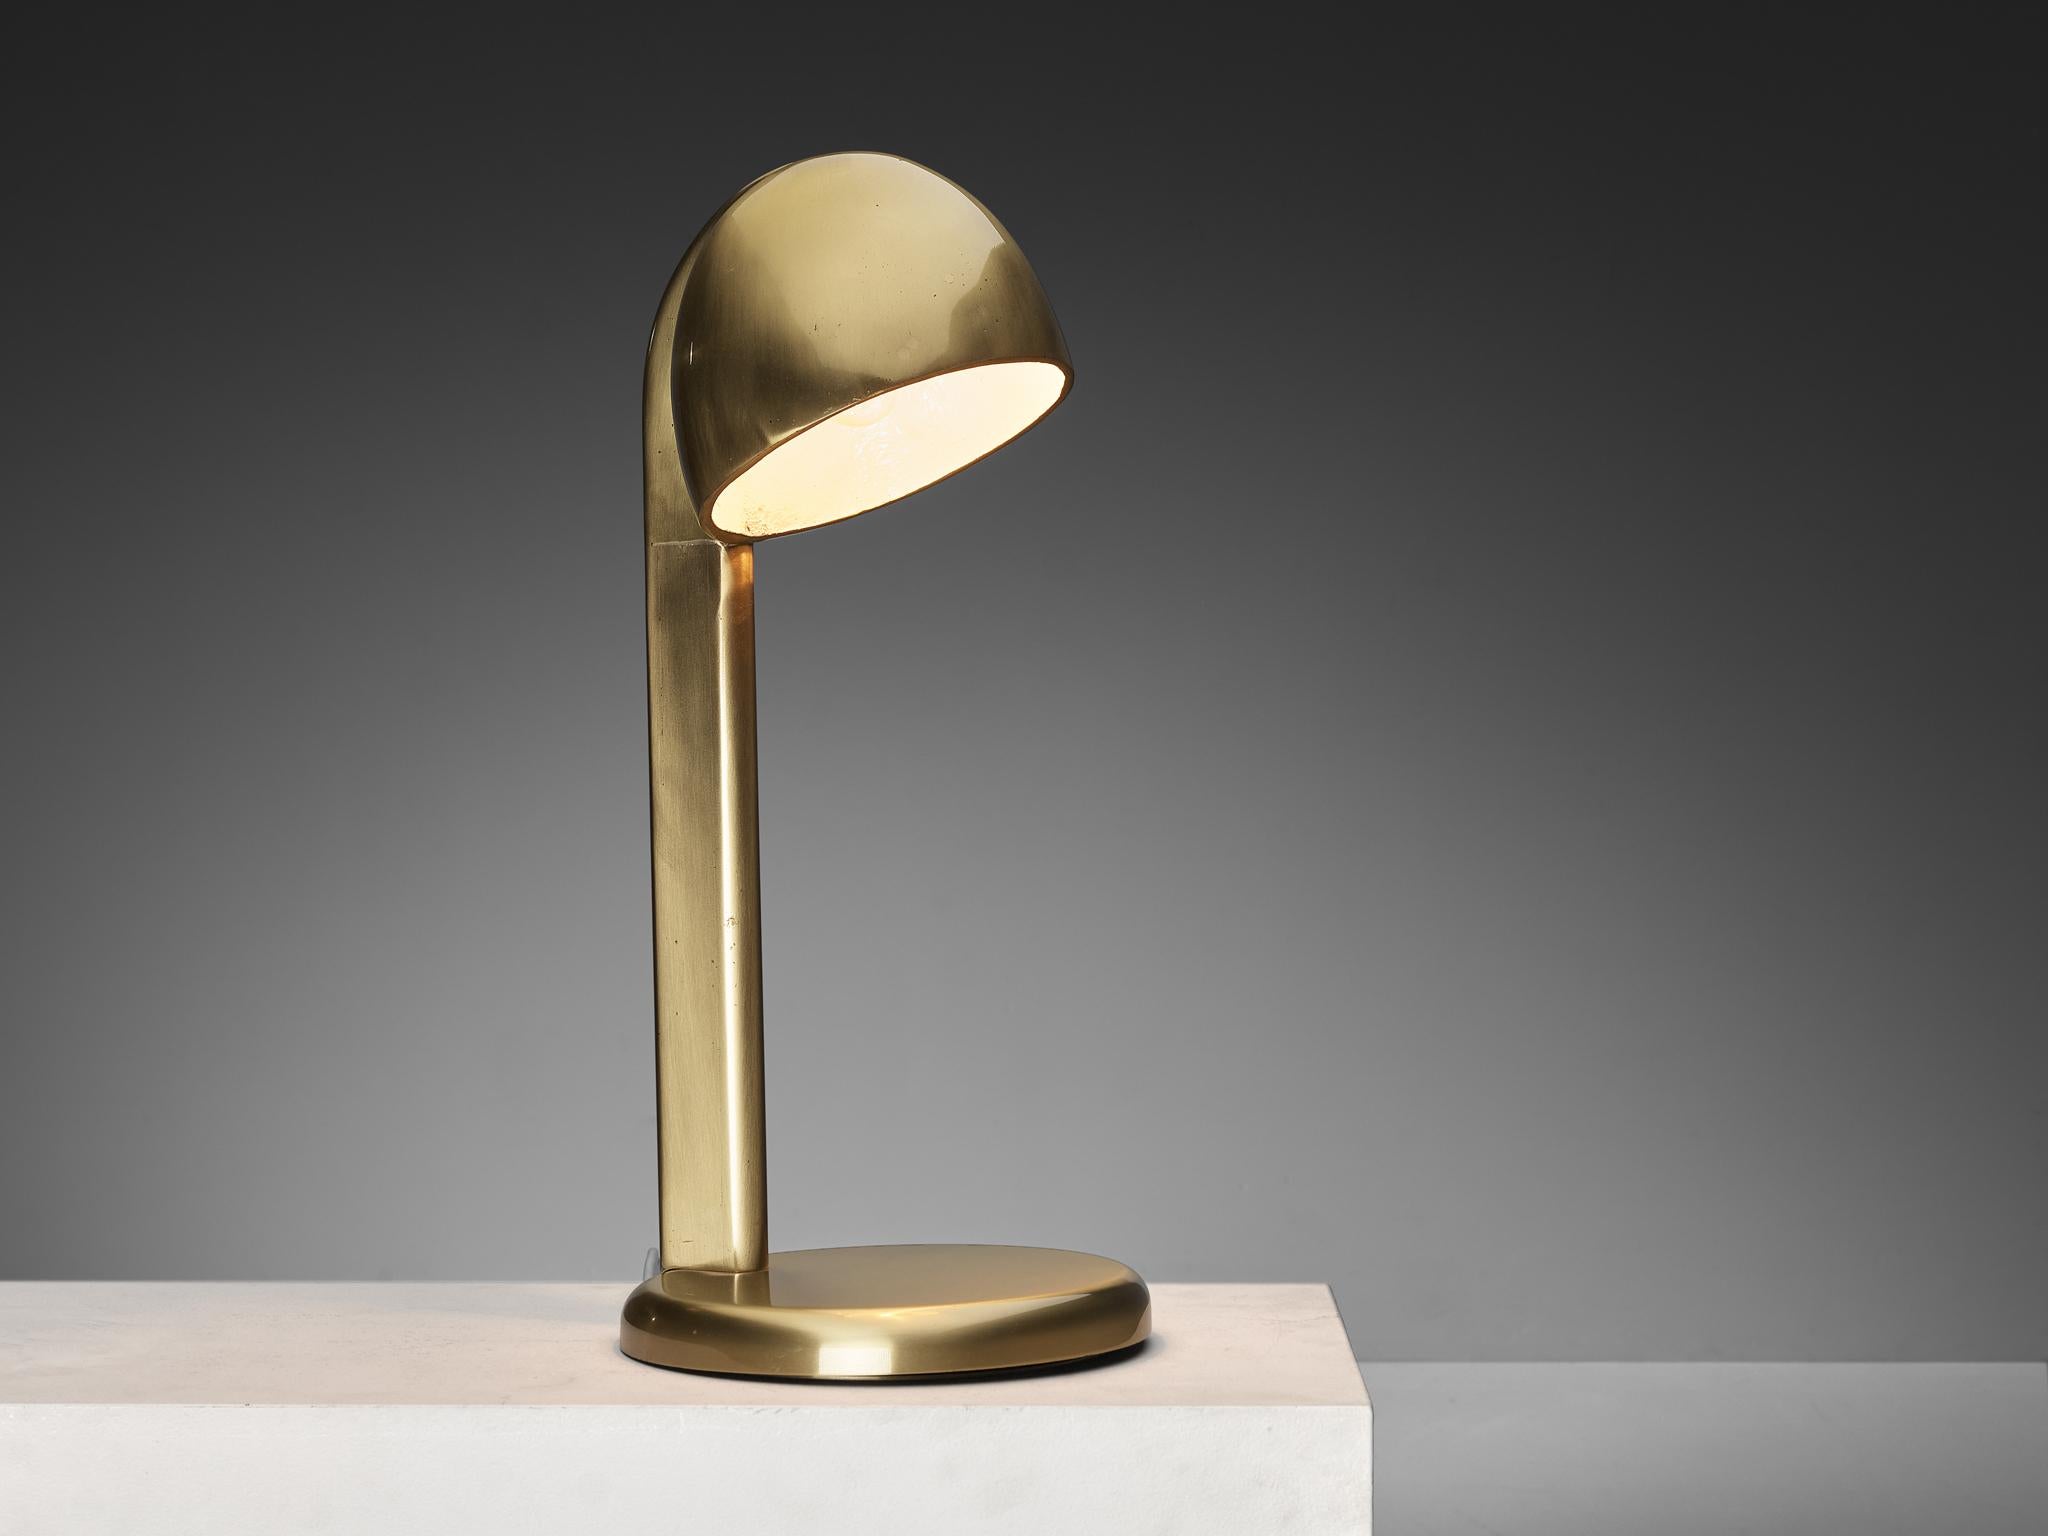 Table lamp, brass, lacquer, Europe, 1970s

Presenting a timeless piece of craftsmanship: this exquisite solid brass table lamp. This design is a true testament to elegance and excess. Made in Europe during the illustrious 1970s, this lamp stands as